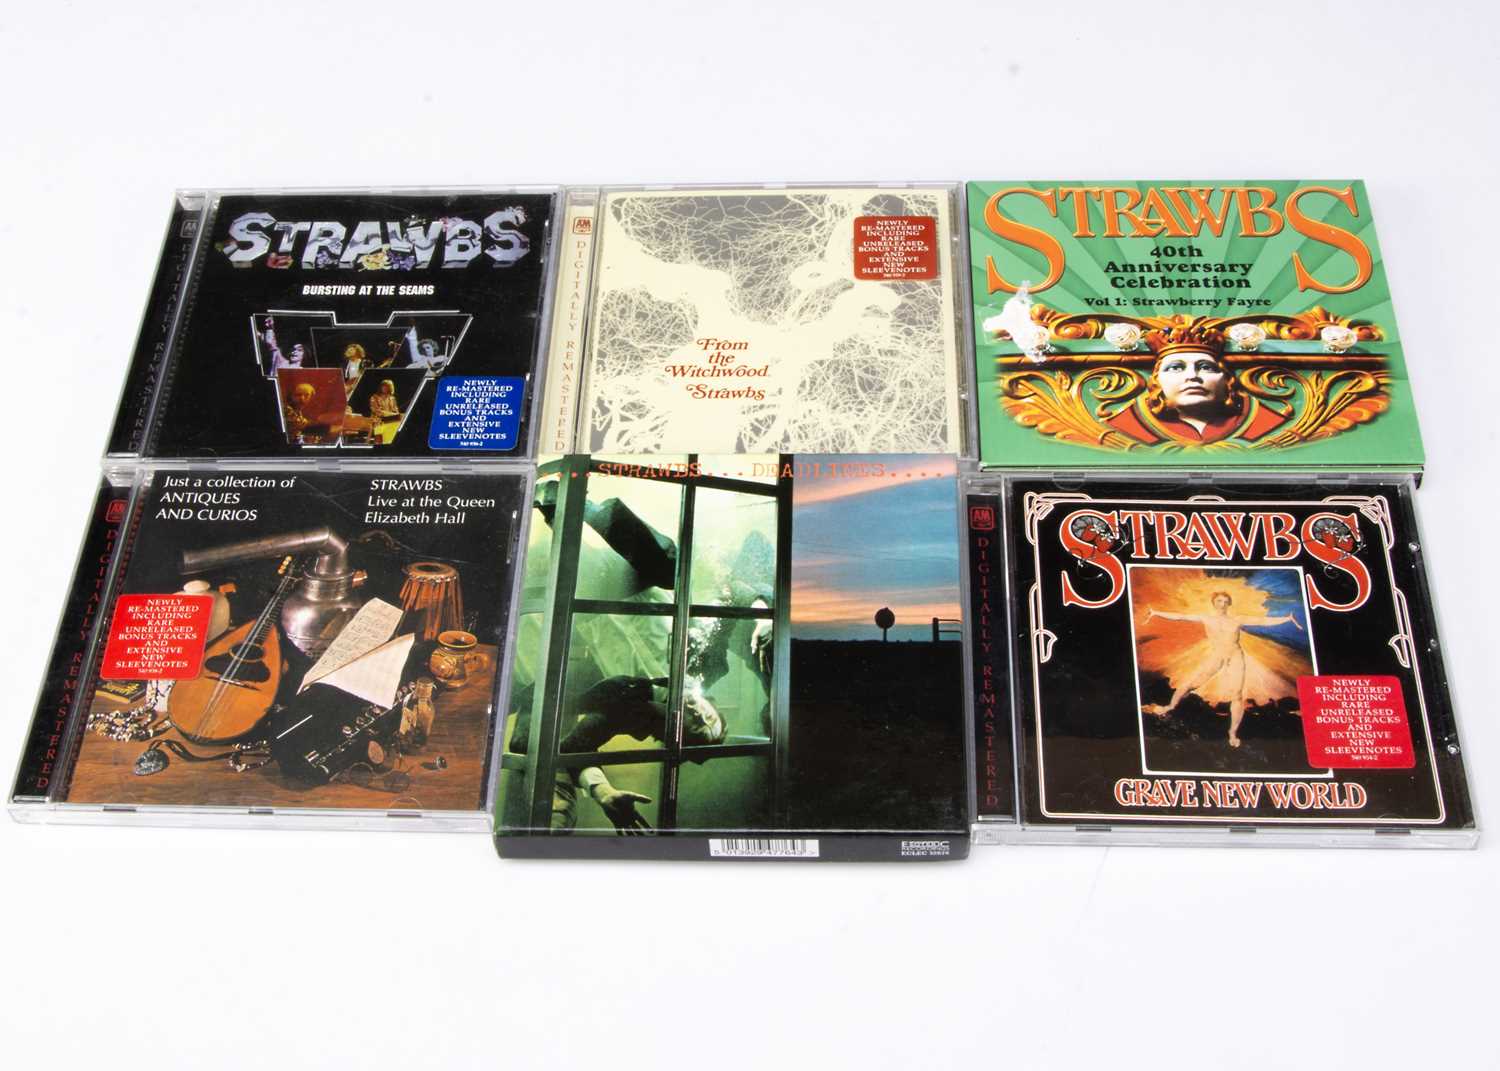 The Strawbs and Solo CDs,